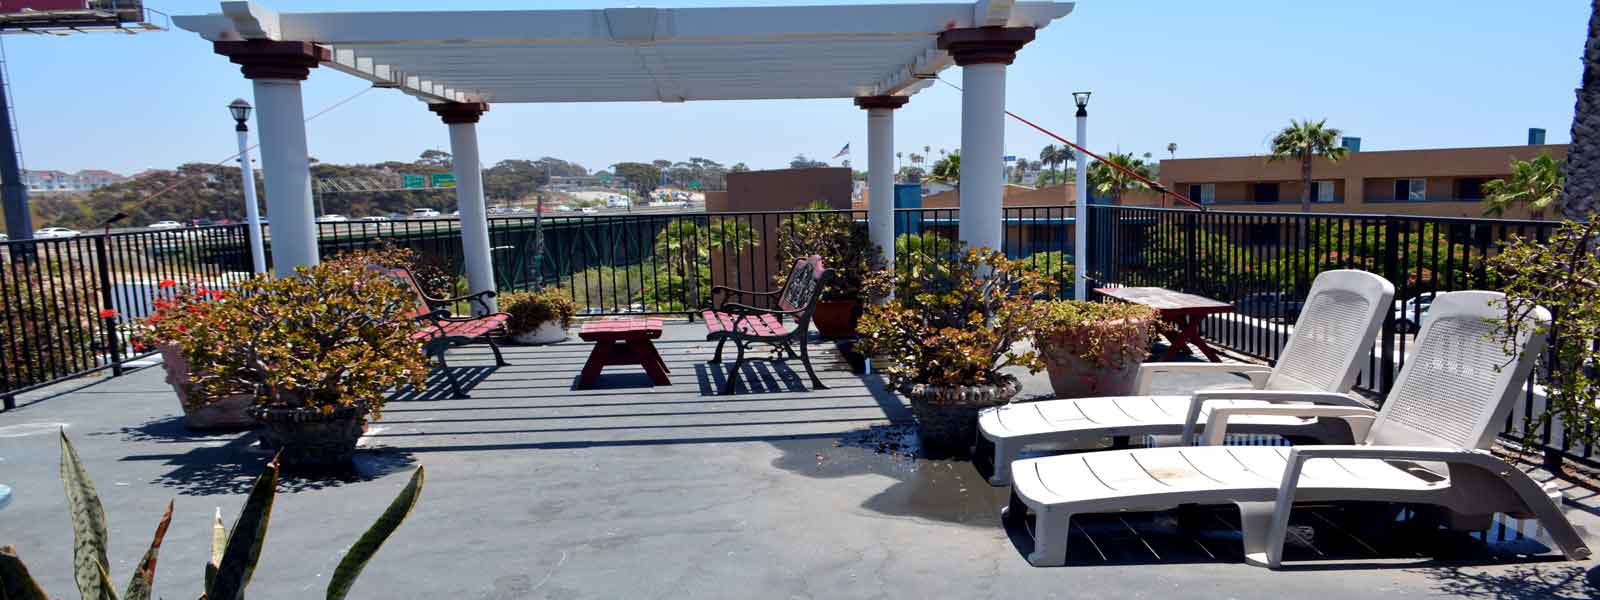 Motels in Oceanside Budget Discount 3 Star Rating 